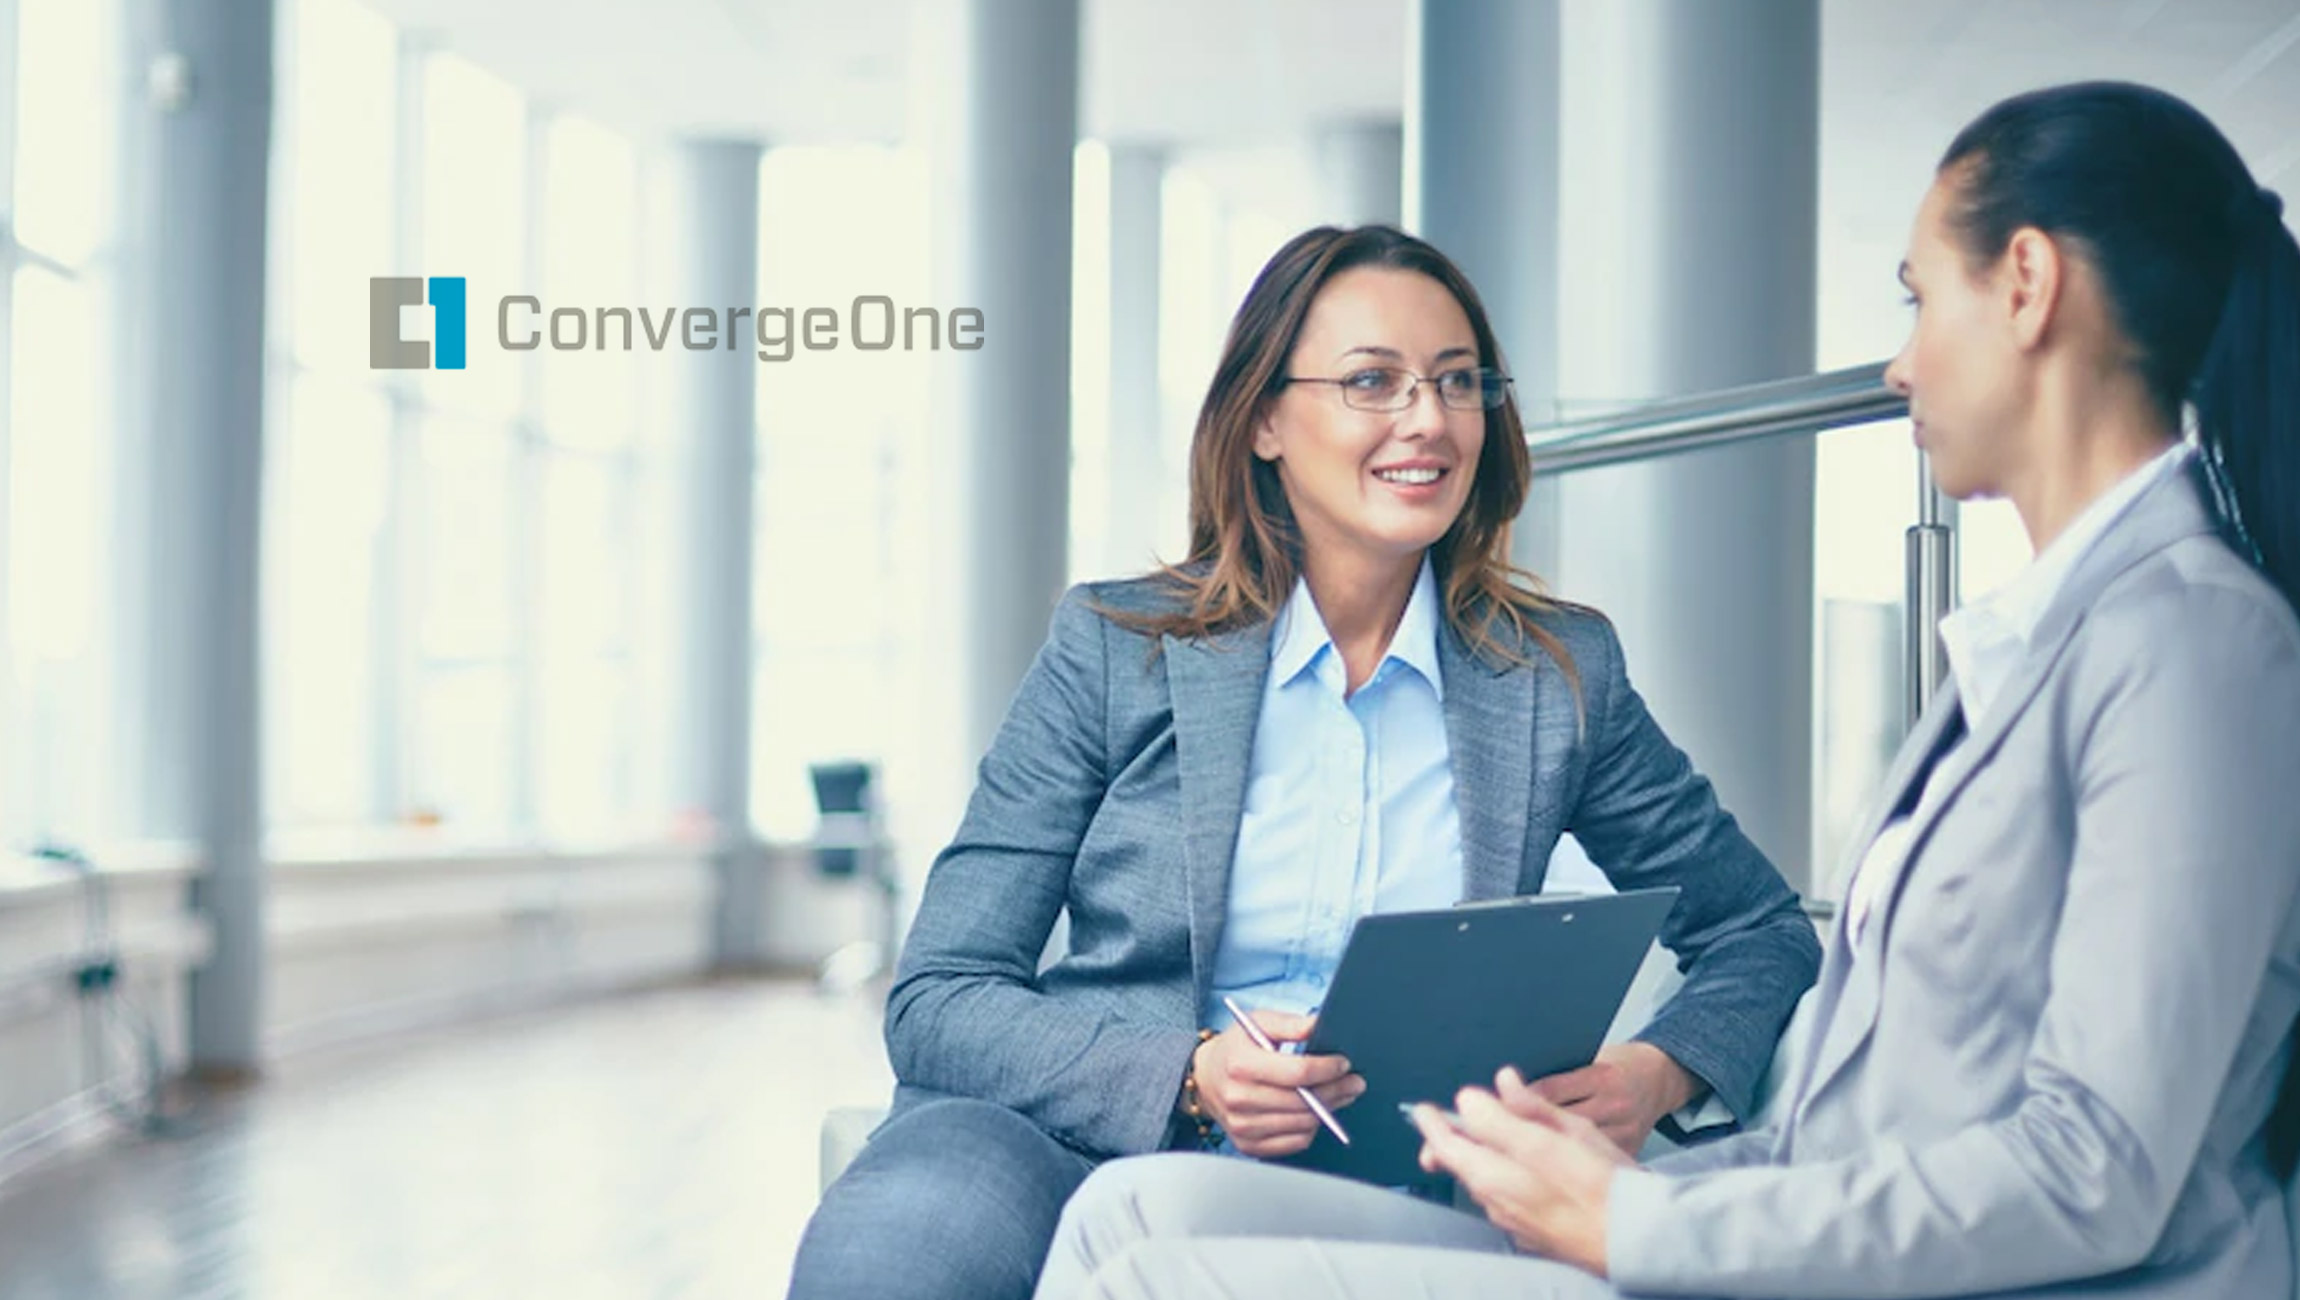 ConvergeOne Announces Availability of Google CCAI's Full-Suite Capabilities as part of C1Conversations Solution